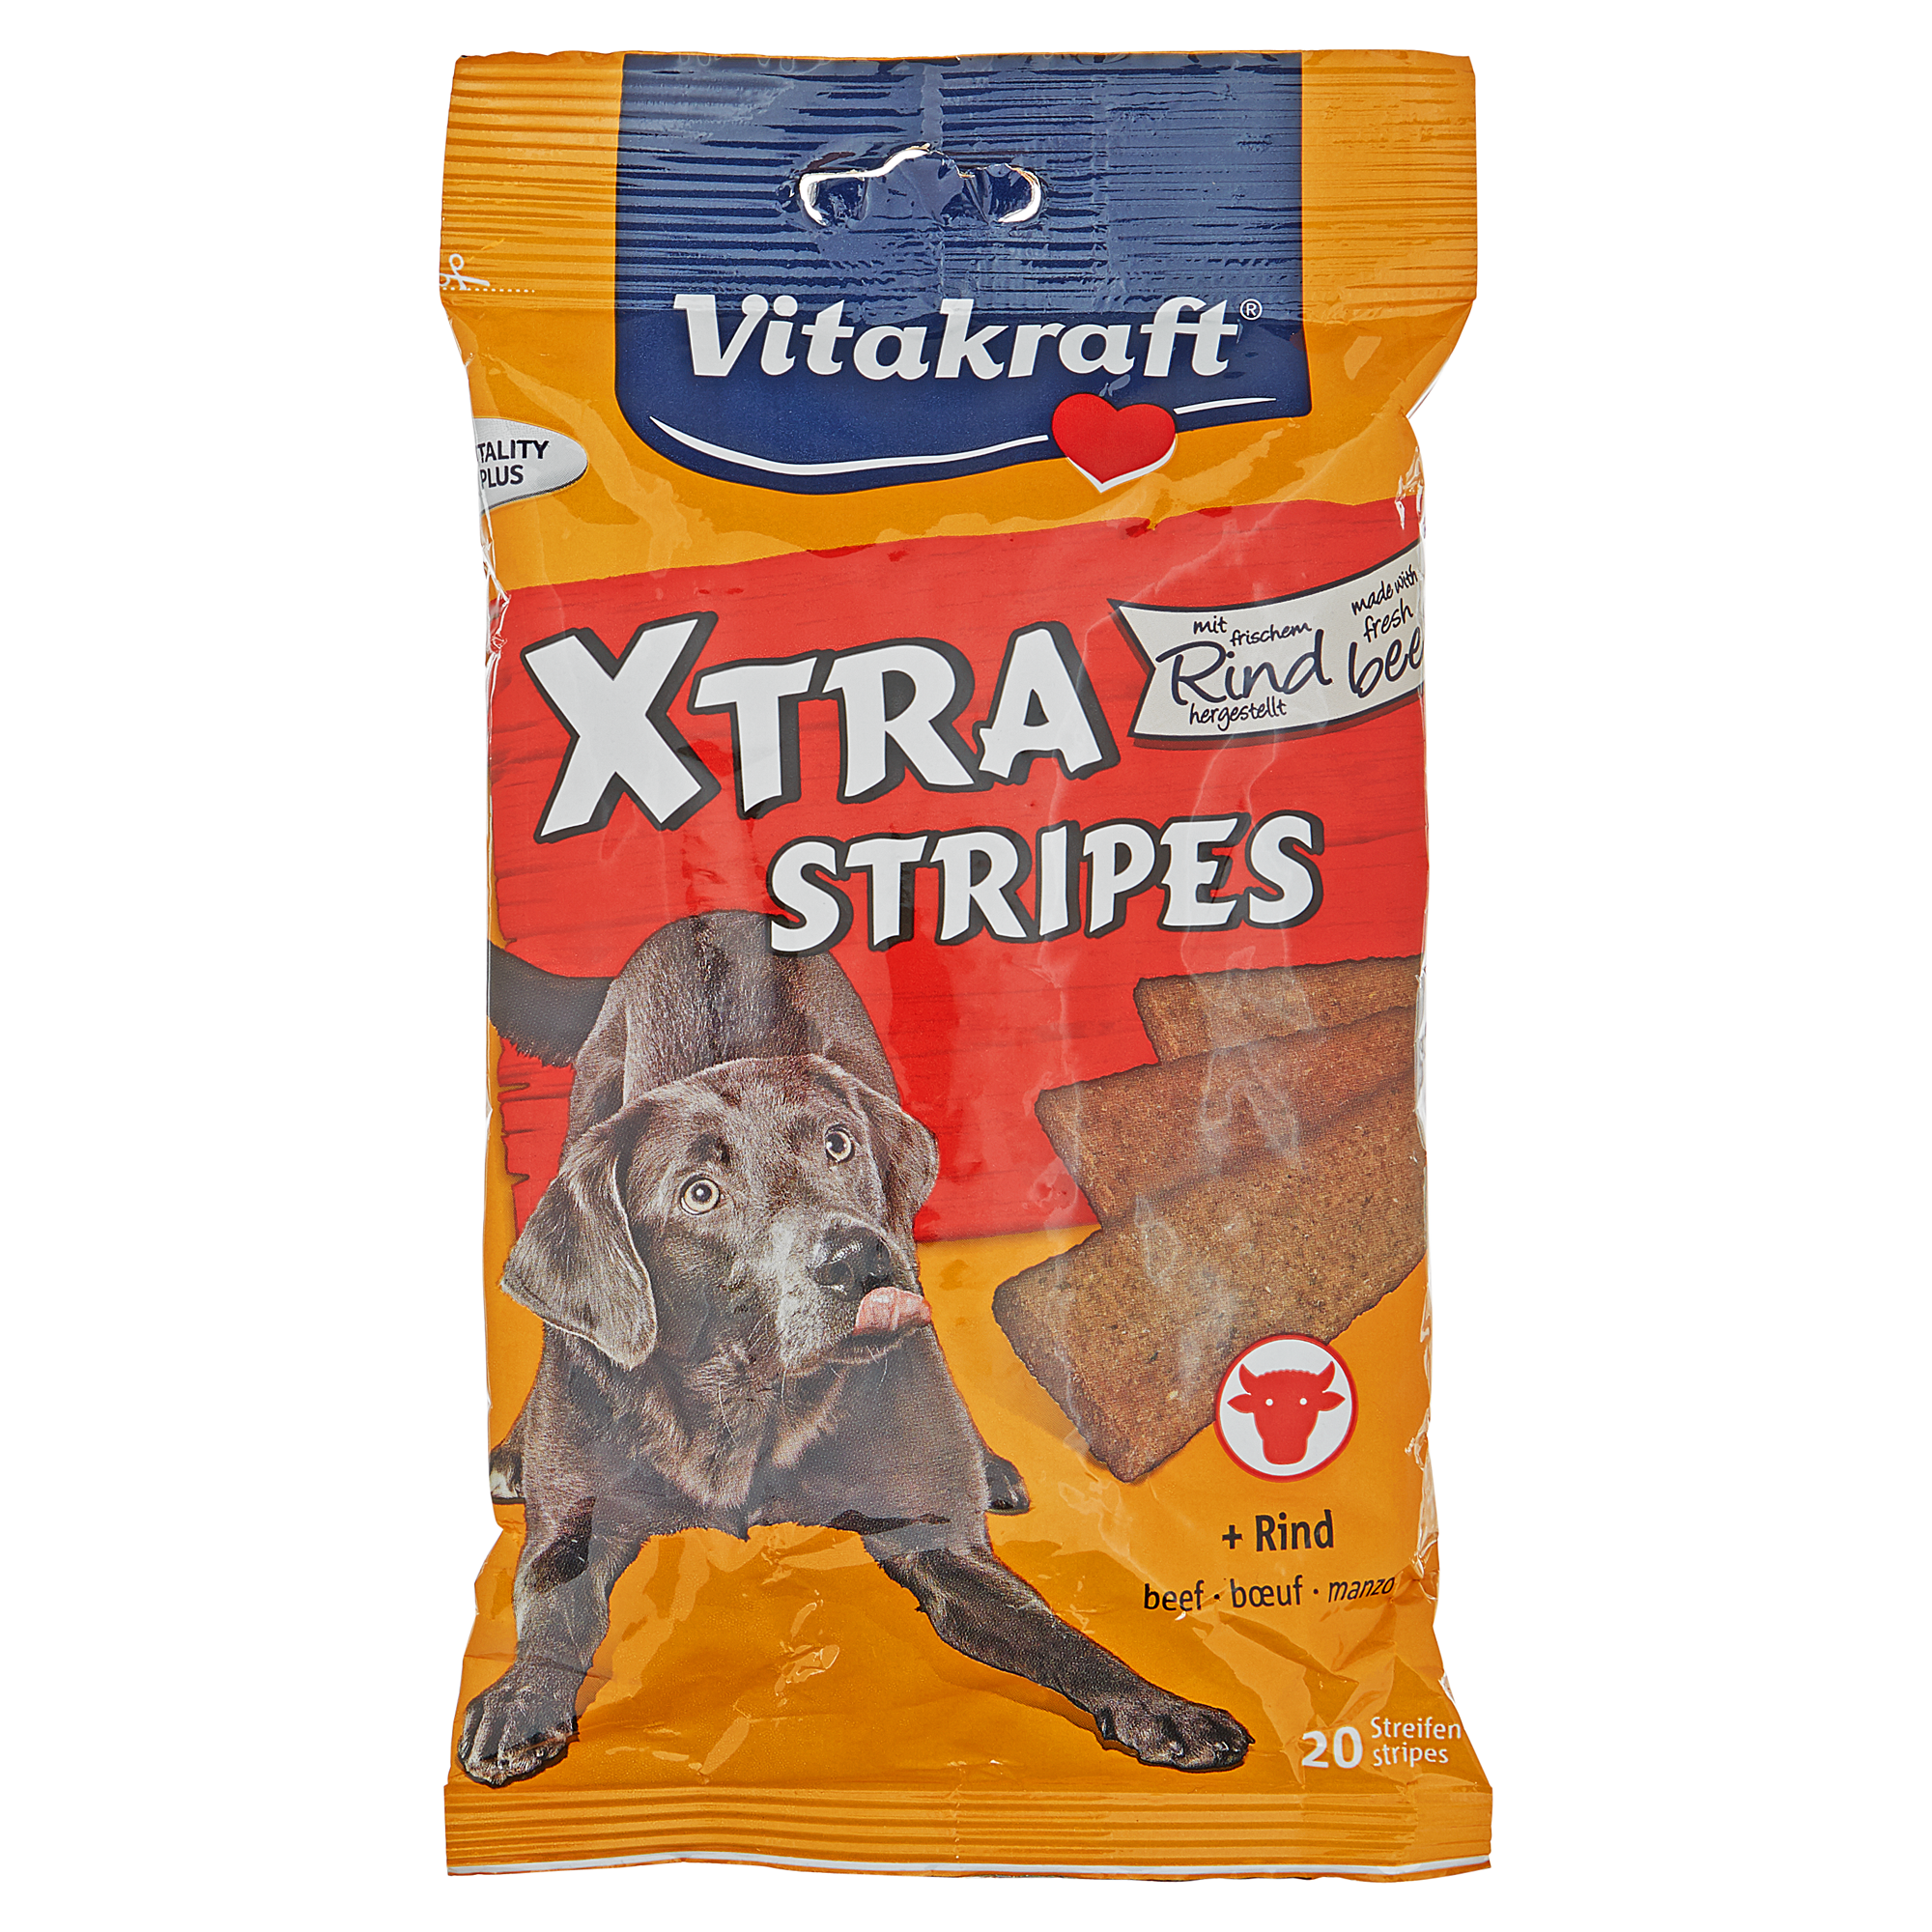 Hundesnack "Xtra Stripes" Rind 20 Stück + product picture